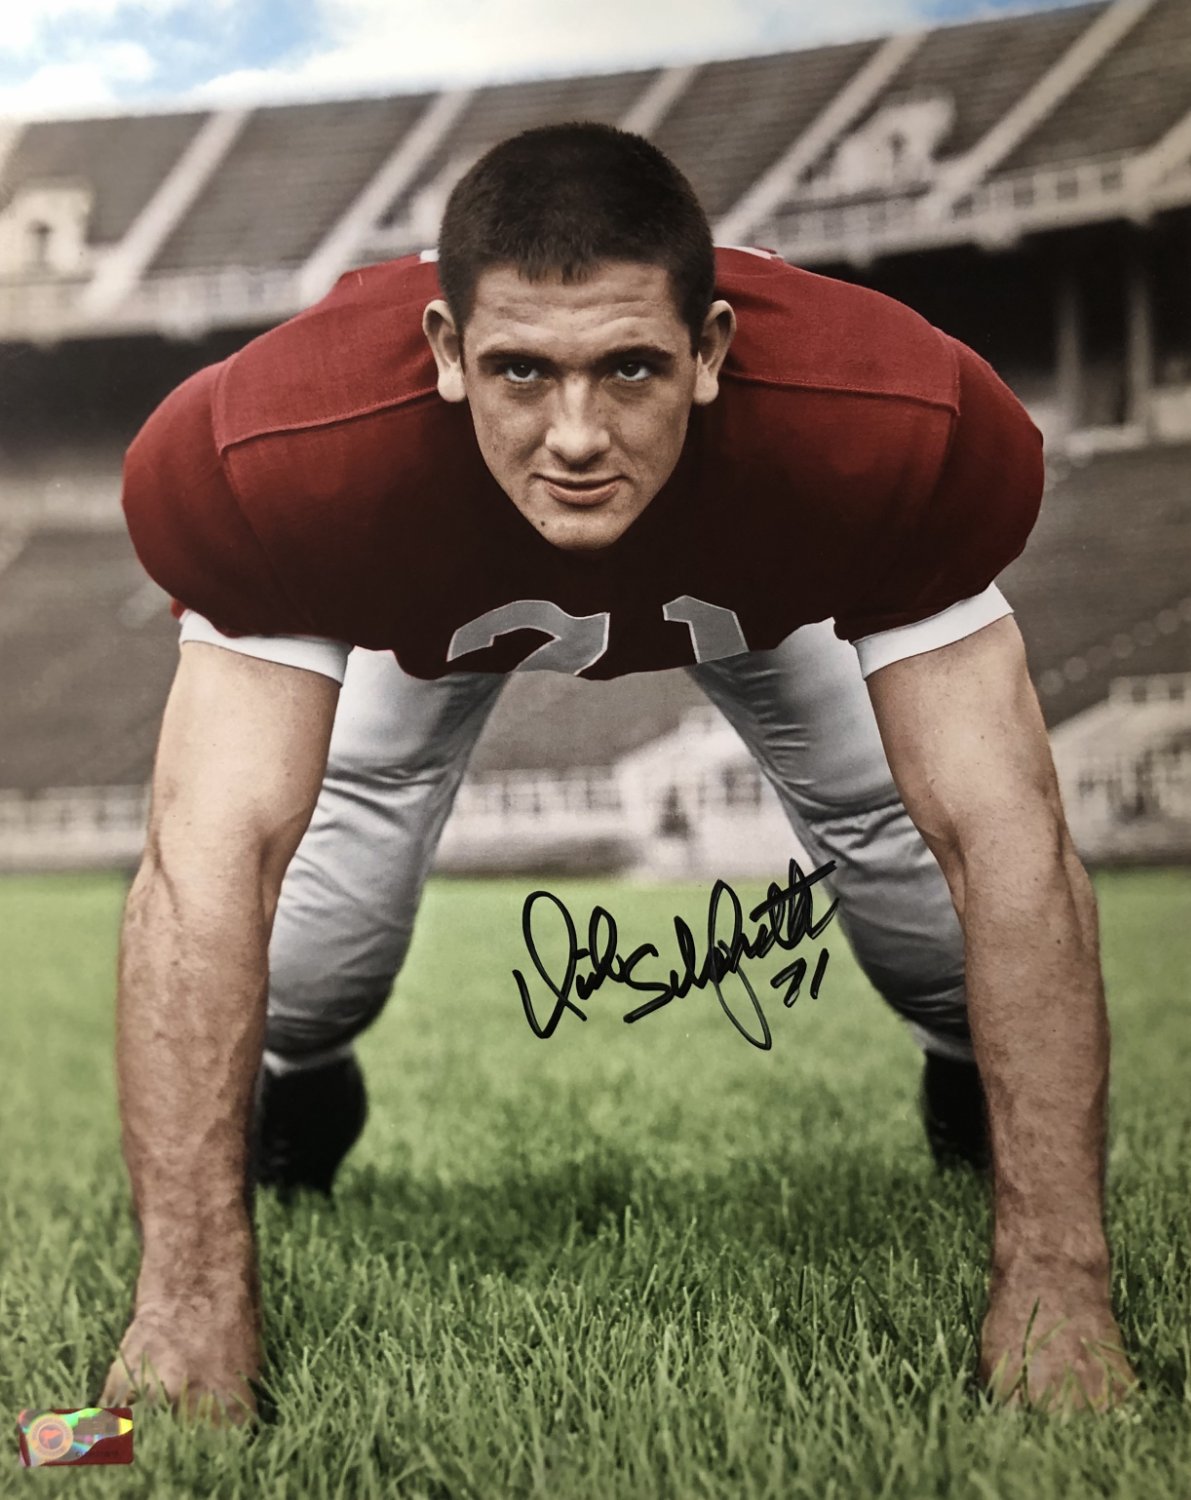 dick_schafrath_ohio_state_buckeyes_16_1_16x20_autographed_signed_photo_certified_authentic_p3358627.jpg